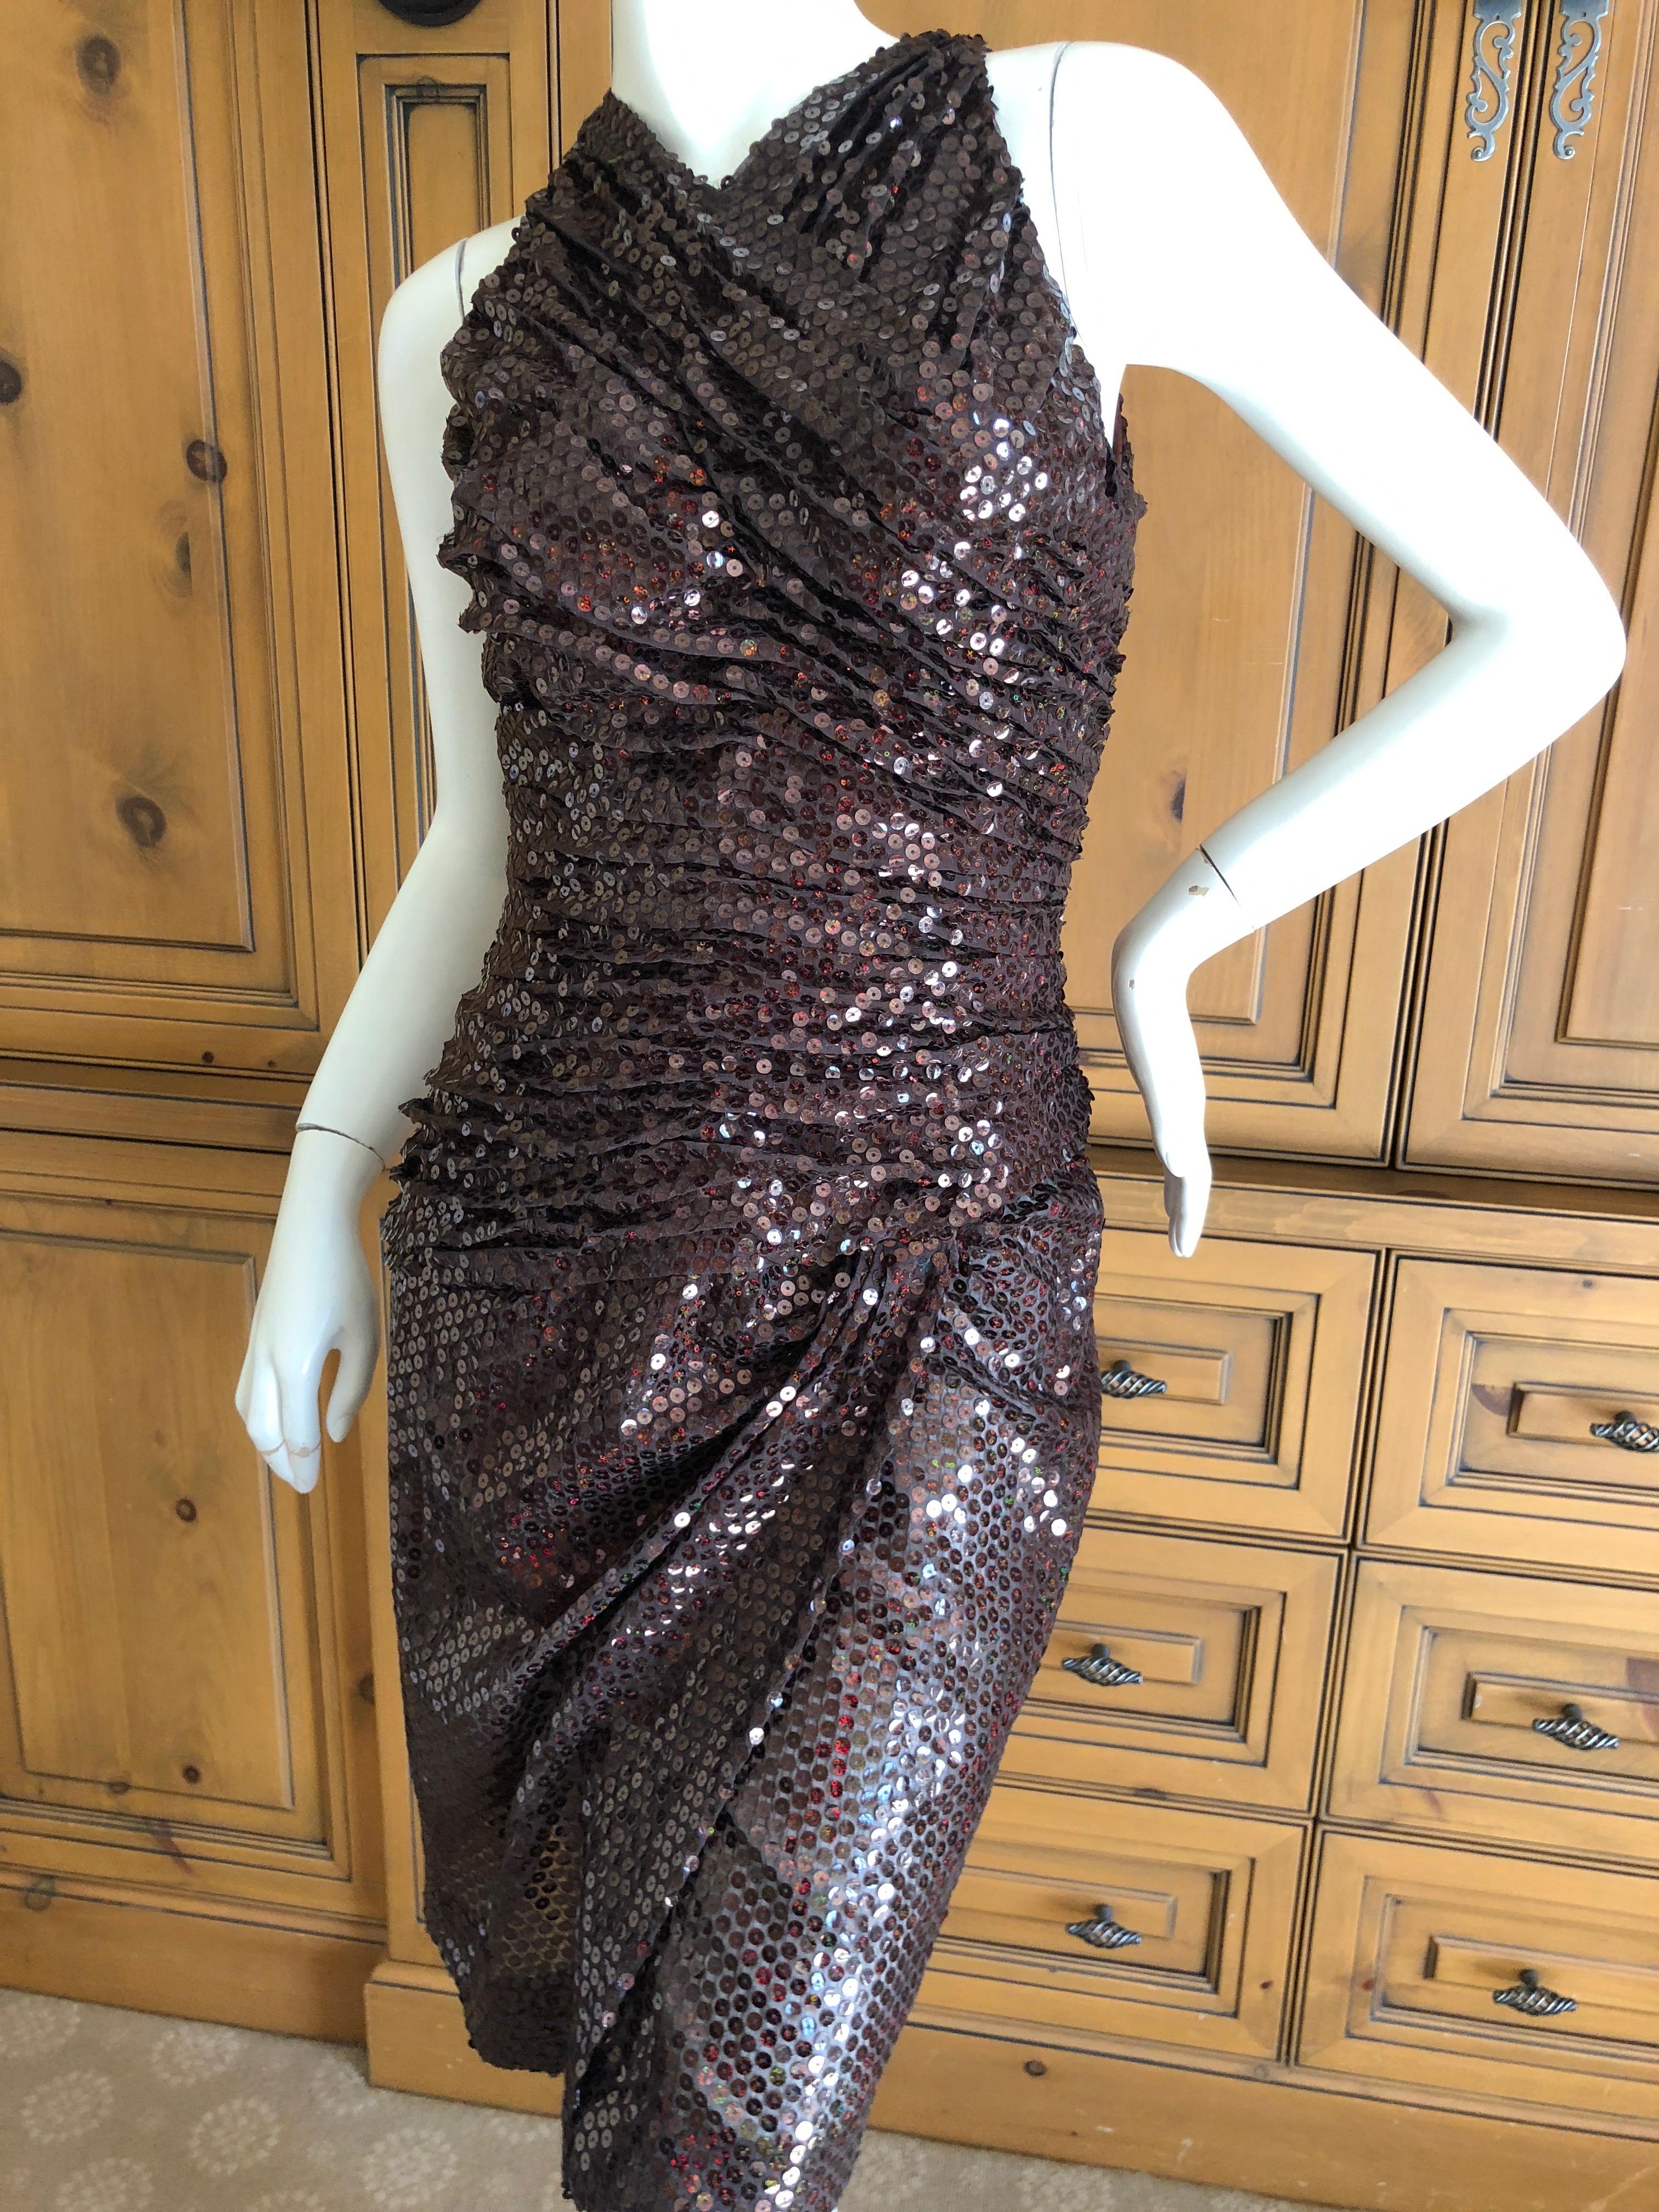 Vicky Tiel Couture Paris Bergdorf Goodman 80's Sequin Sleeveless Cocktail Dress
The witty quote was 